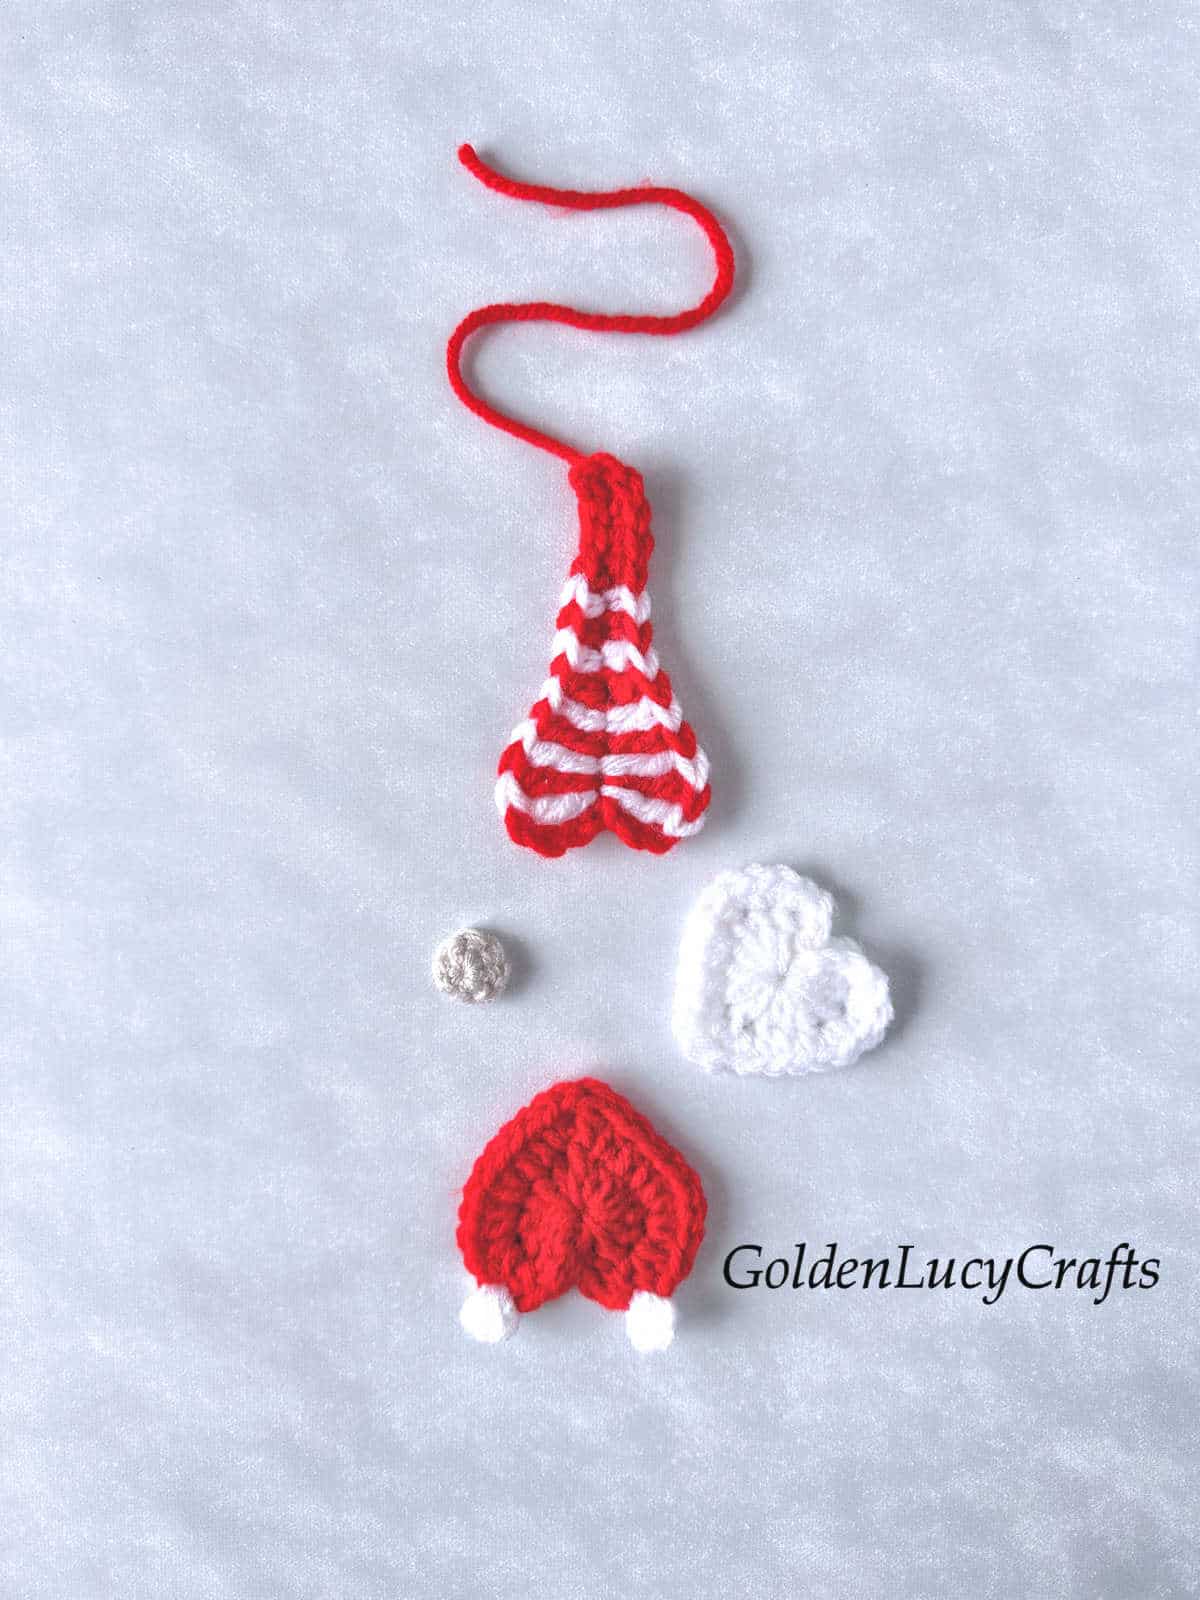 Parts of the crochet candy cane gnome.